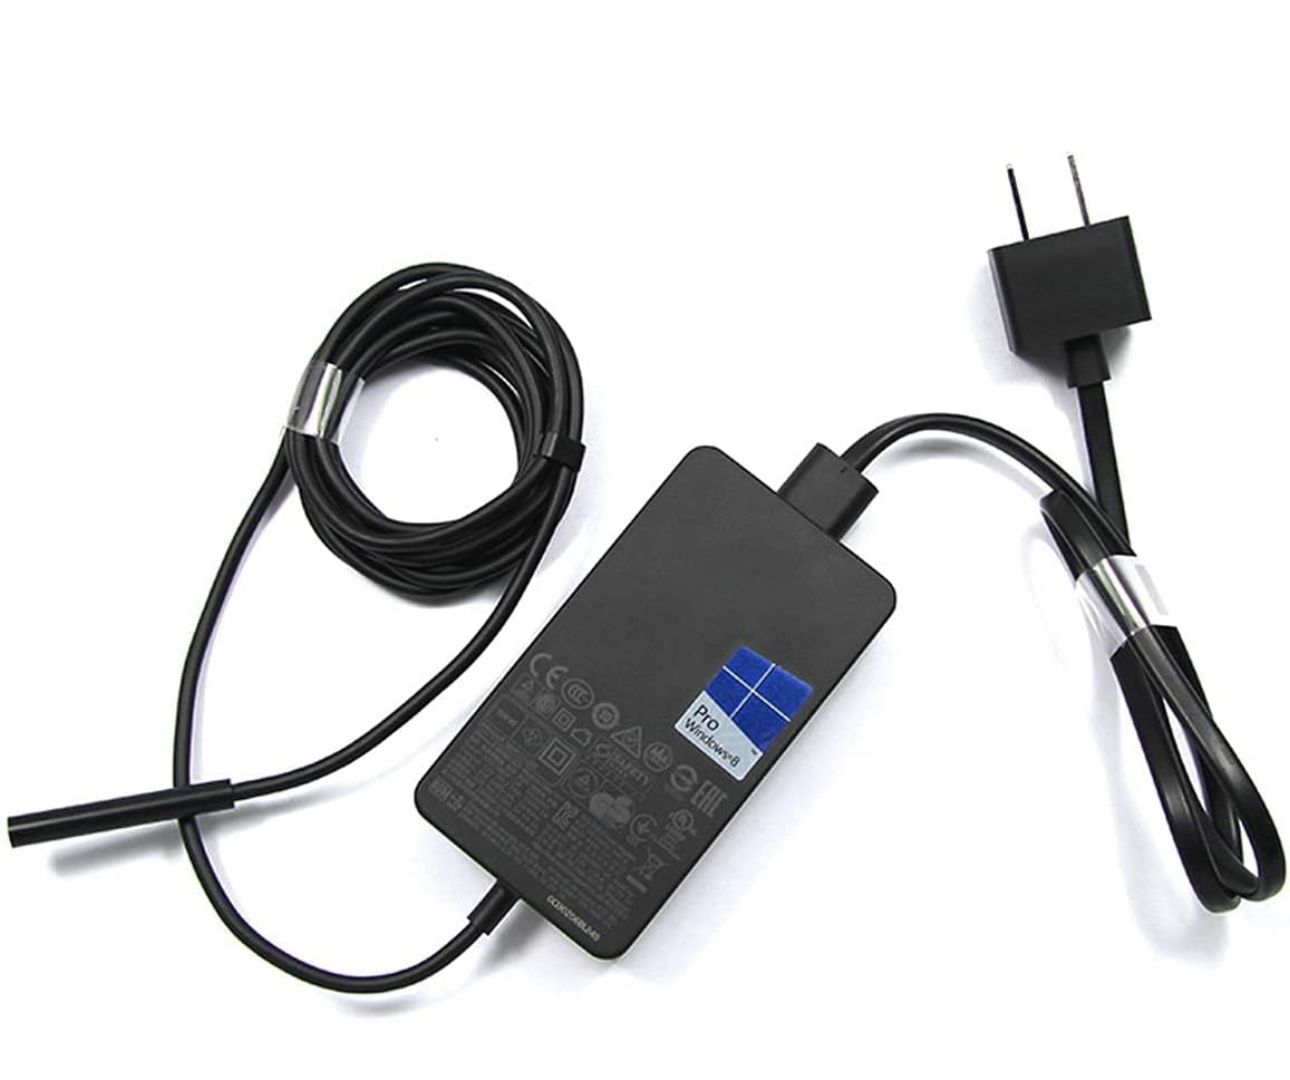 65W Surface Pro Charger Compatible with Microsoft Surface Pro 3 4 5 6 7 8 9 X 1(contact info removed) 1800 Laptop Charger